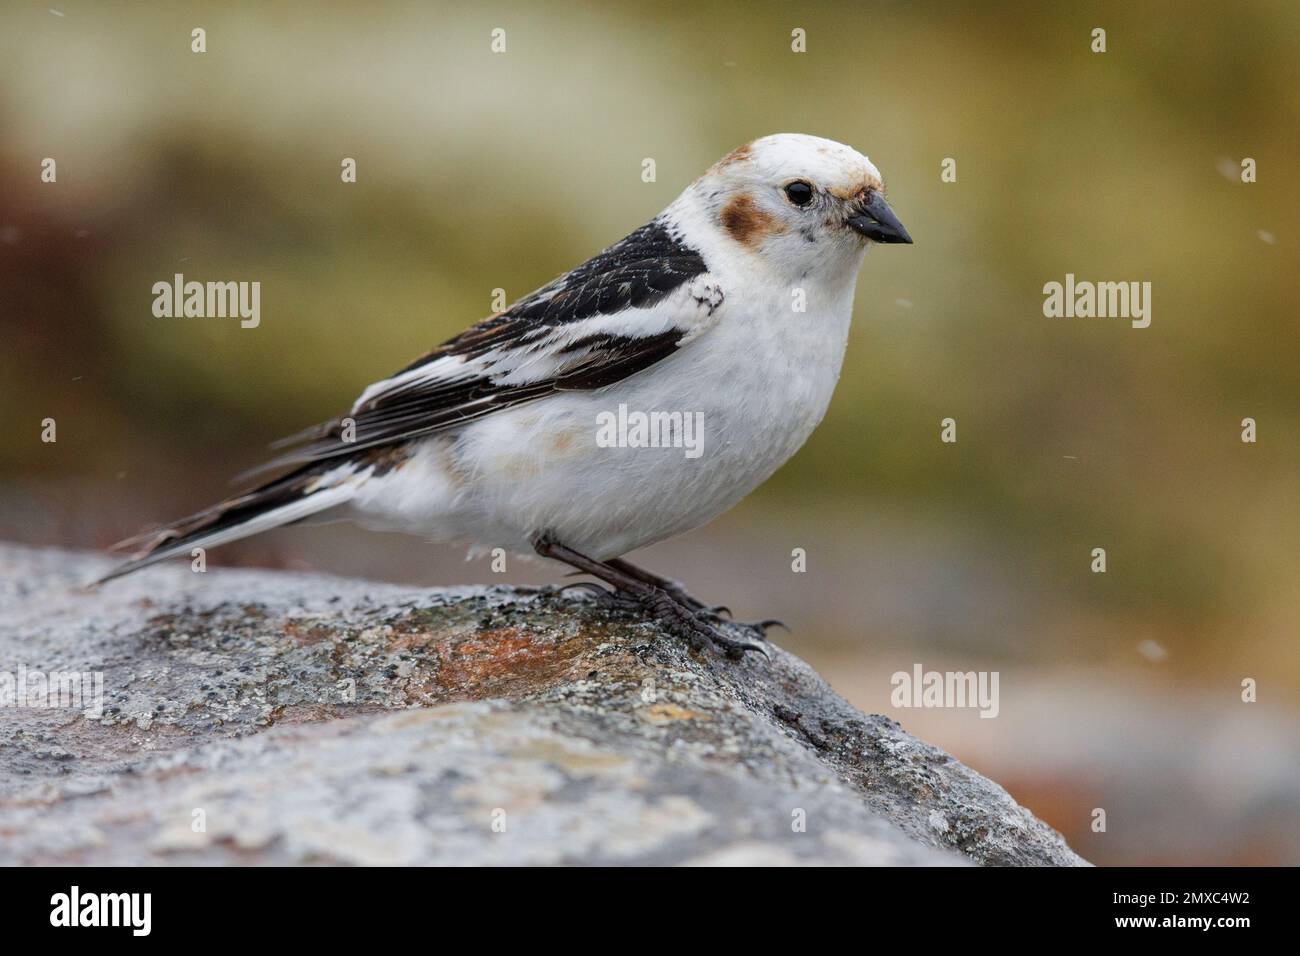 Snow Bunting (Plectrophenax nivalis insulae), side view of an adult male standing on a rock, Northeastern Region, Iceland Stock Photo